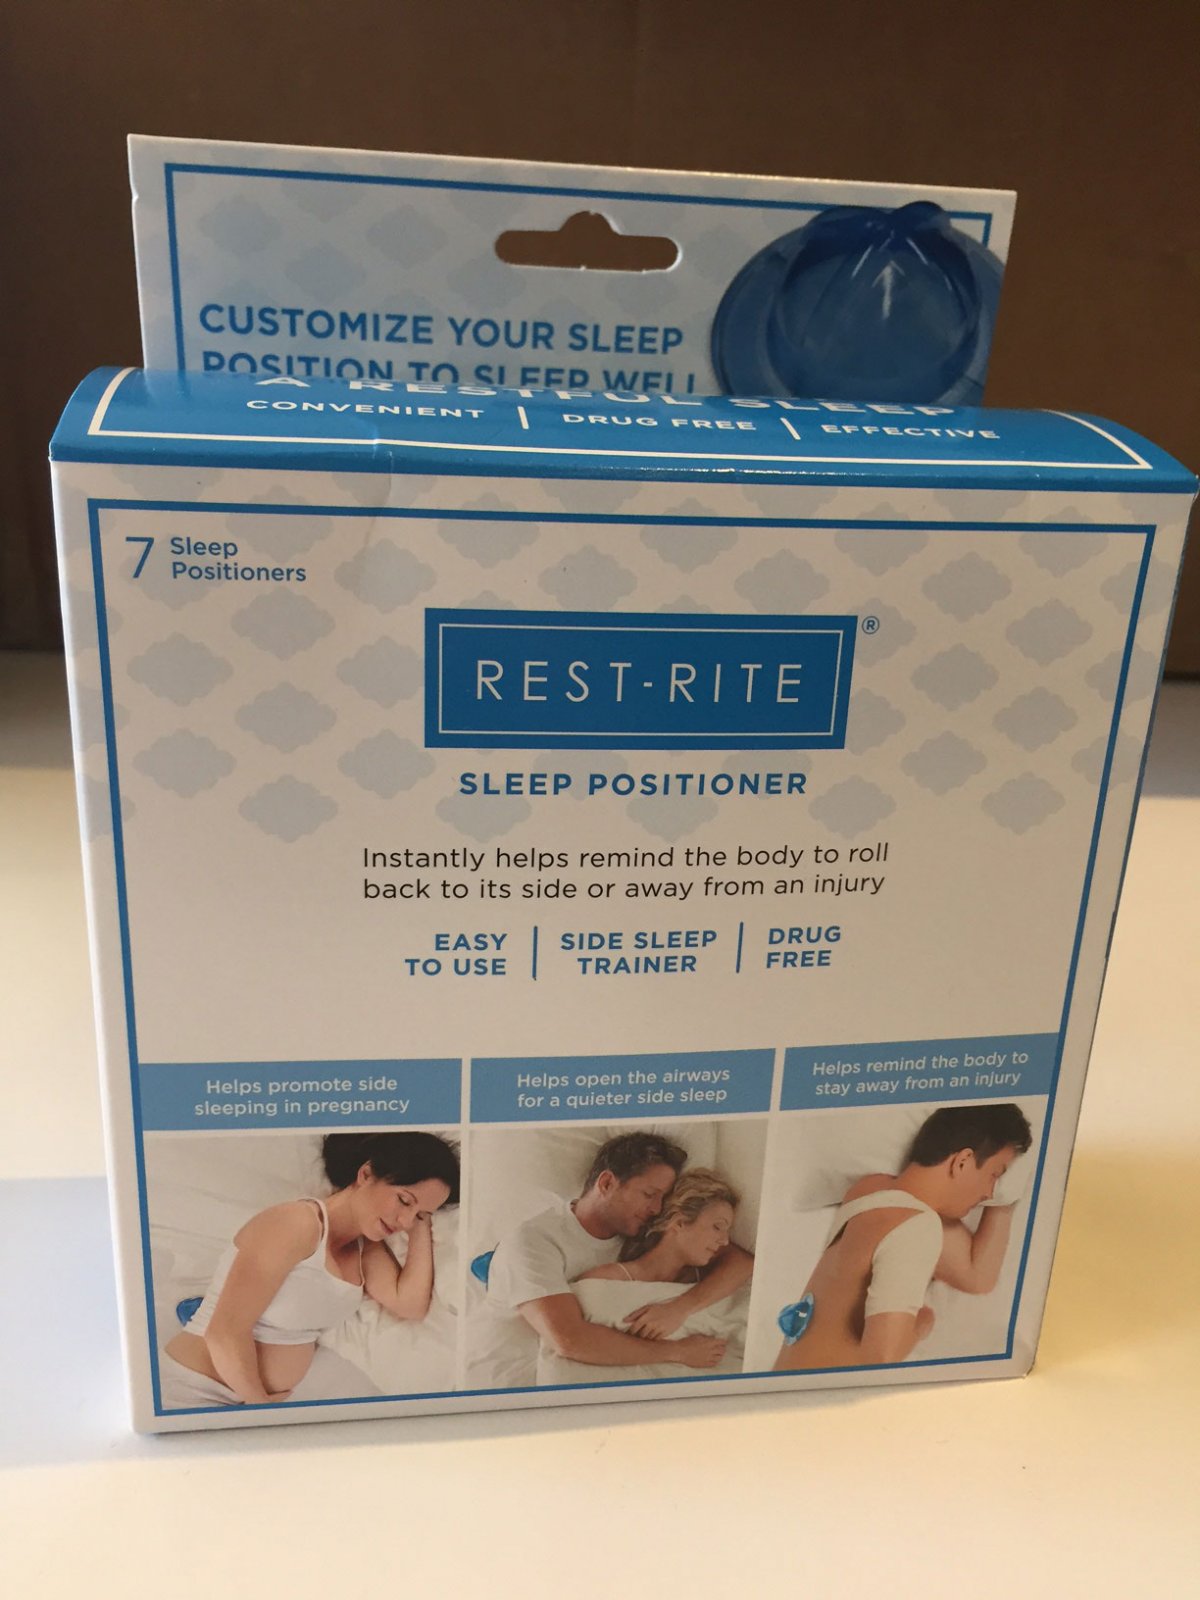 the-rest-rite-sleep-positioner-gives-a-fellow-sleeper-a-nudge-to-keep-them-off-their-back-and-not-snoring